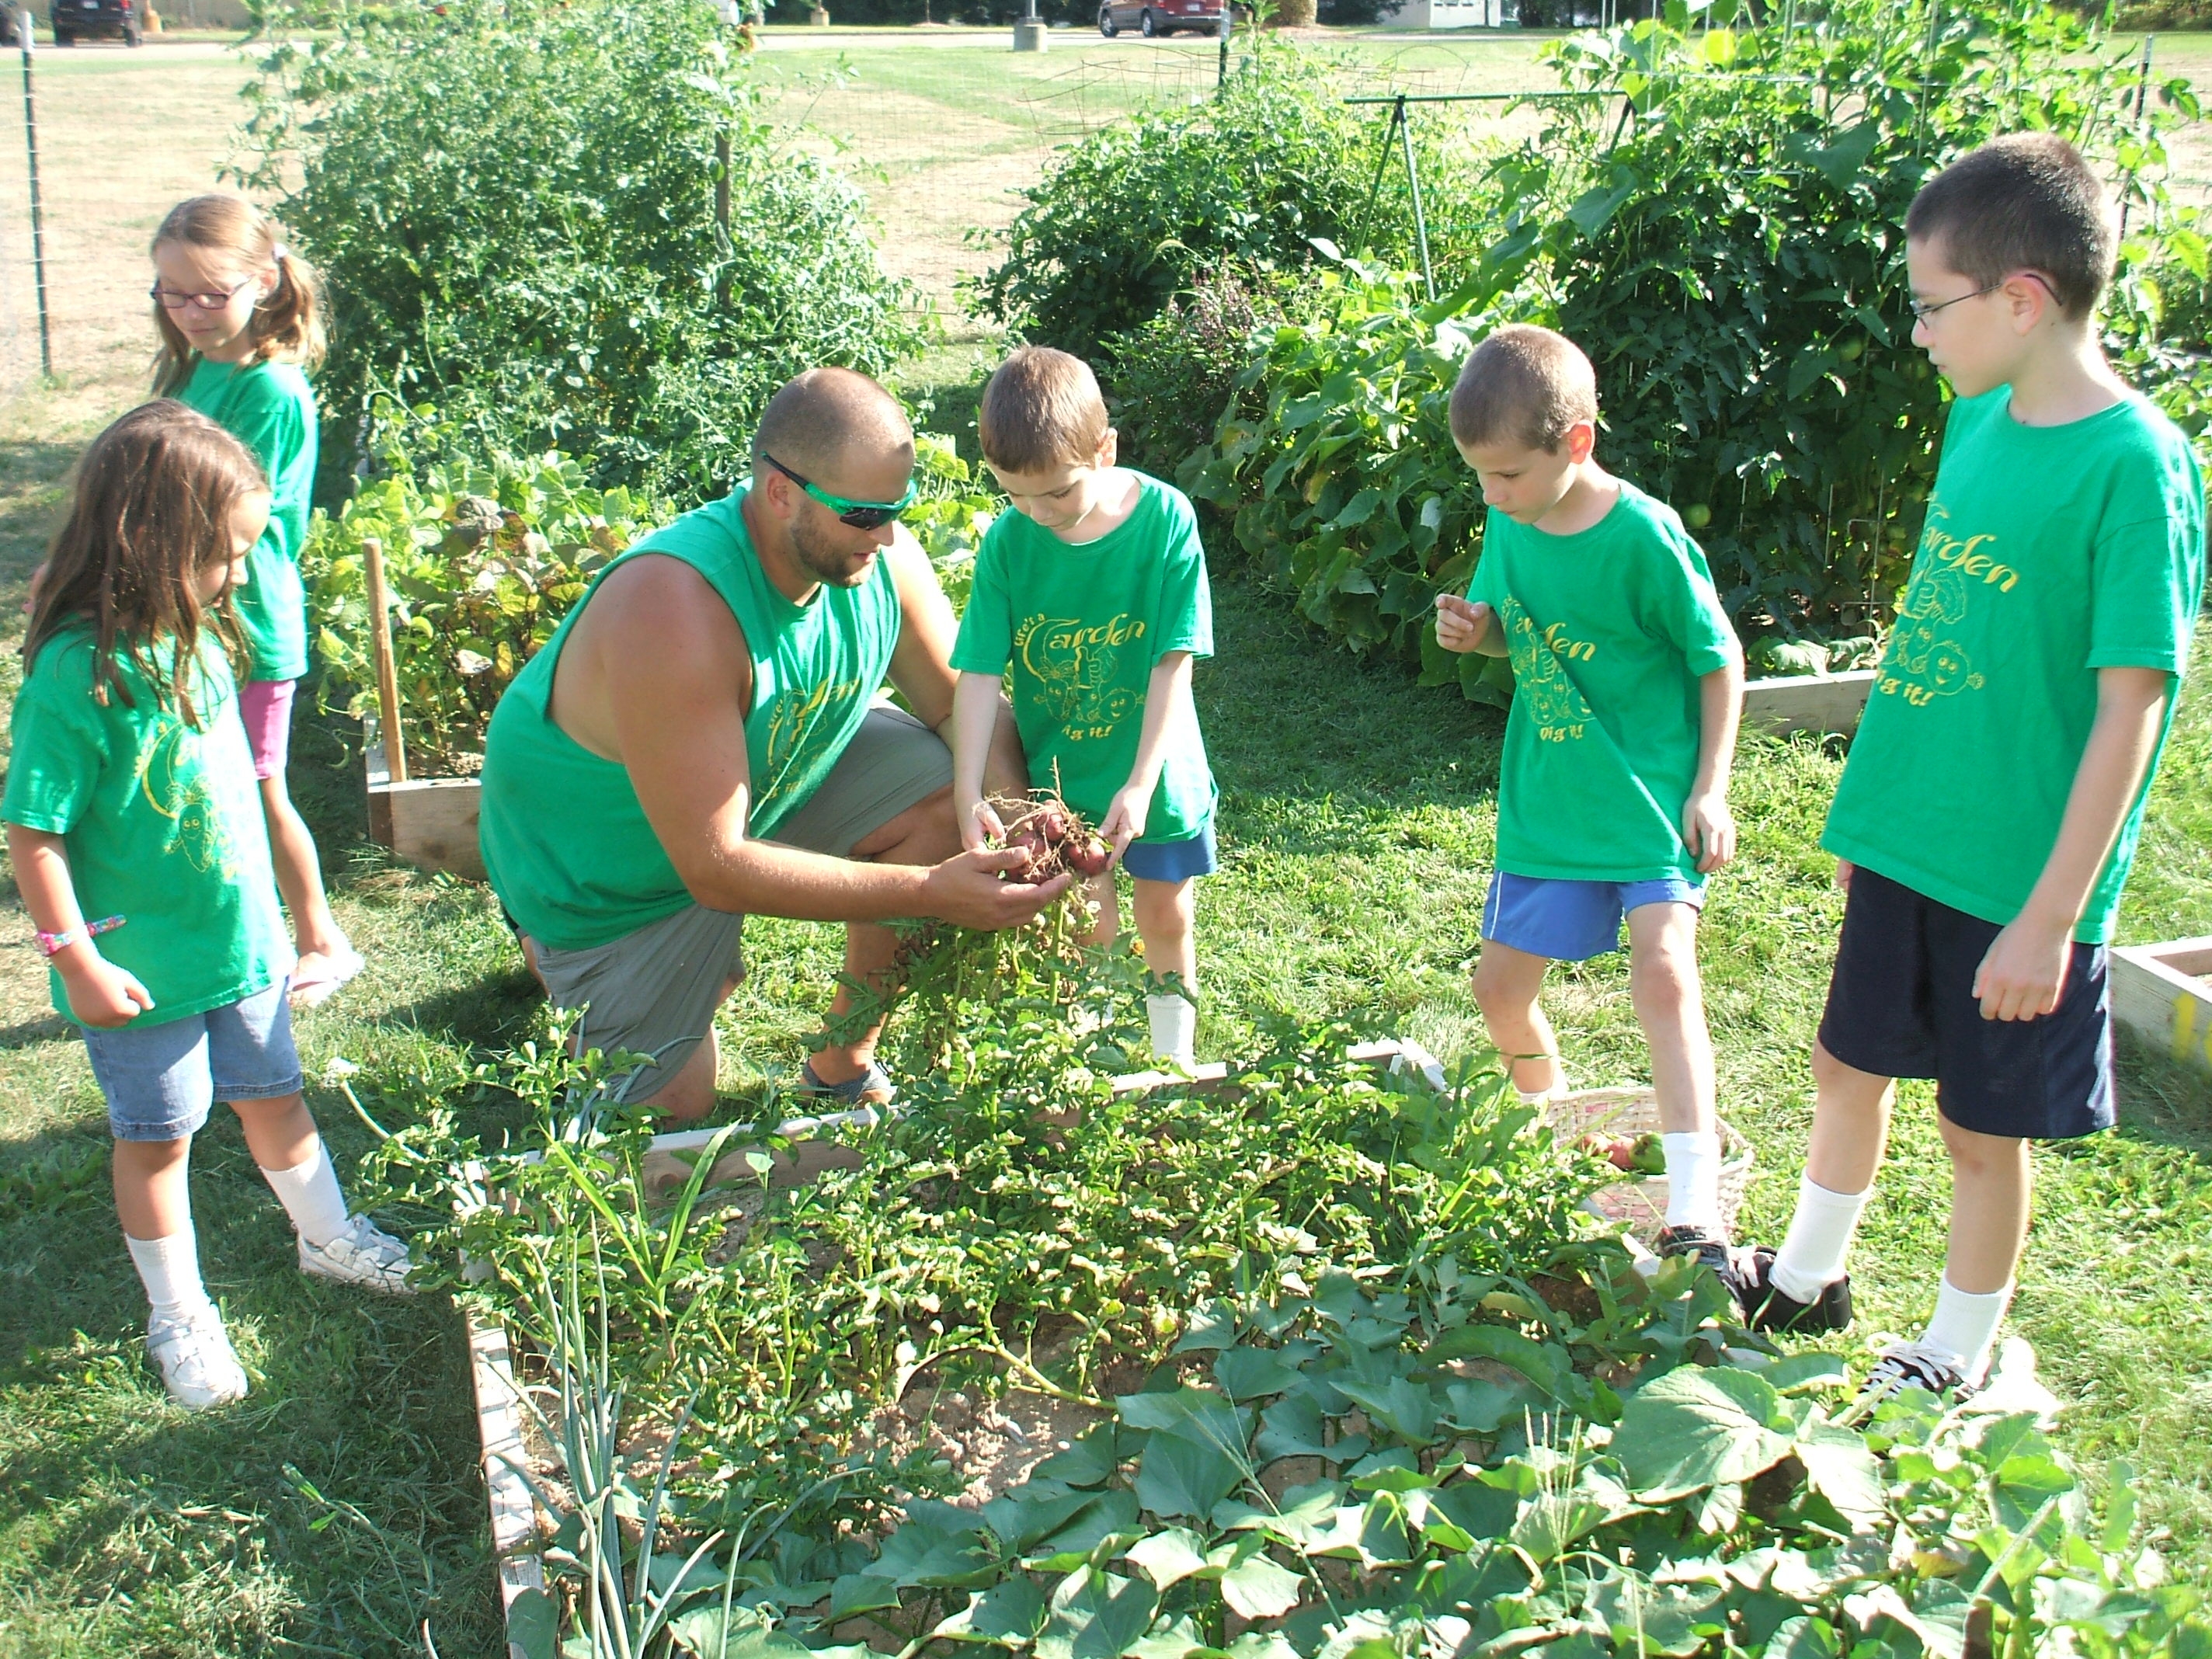 Oaklawn offers weekly gardening classes for students ages 5 through 10